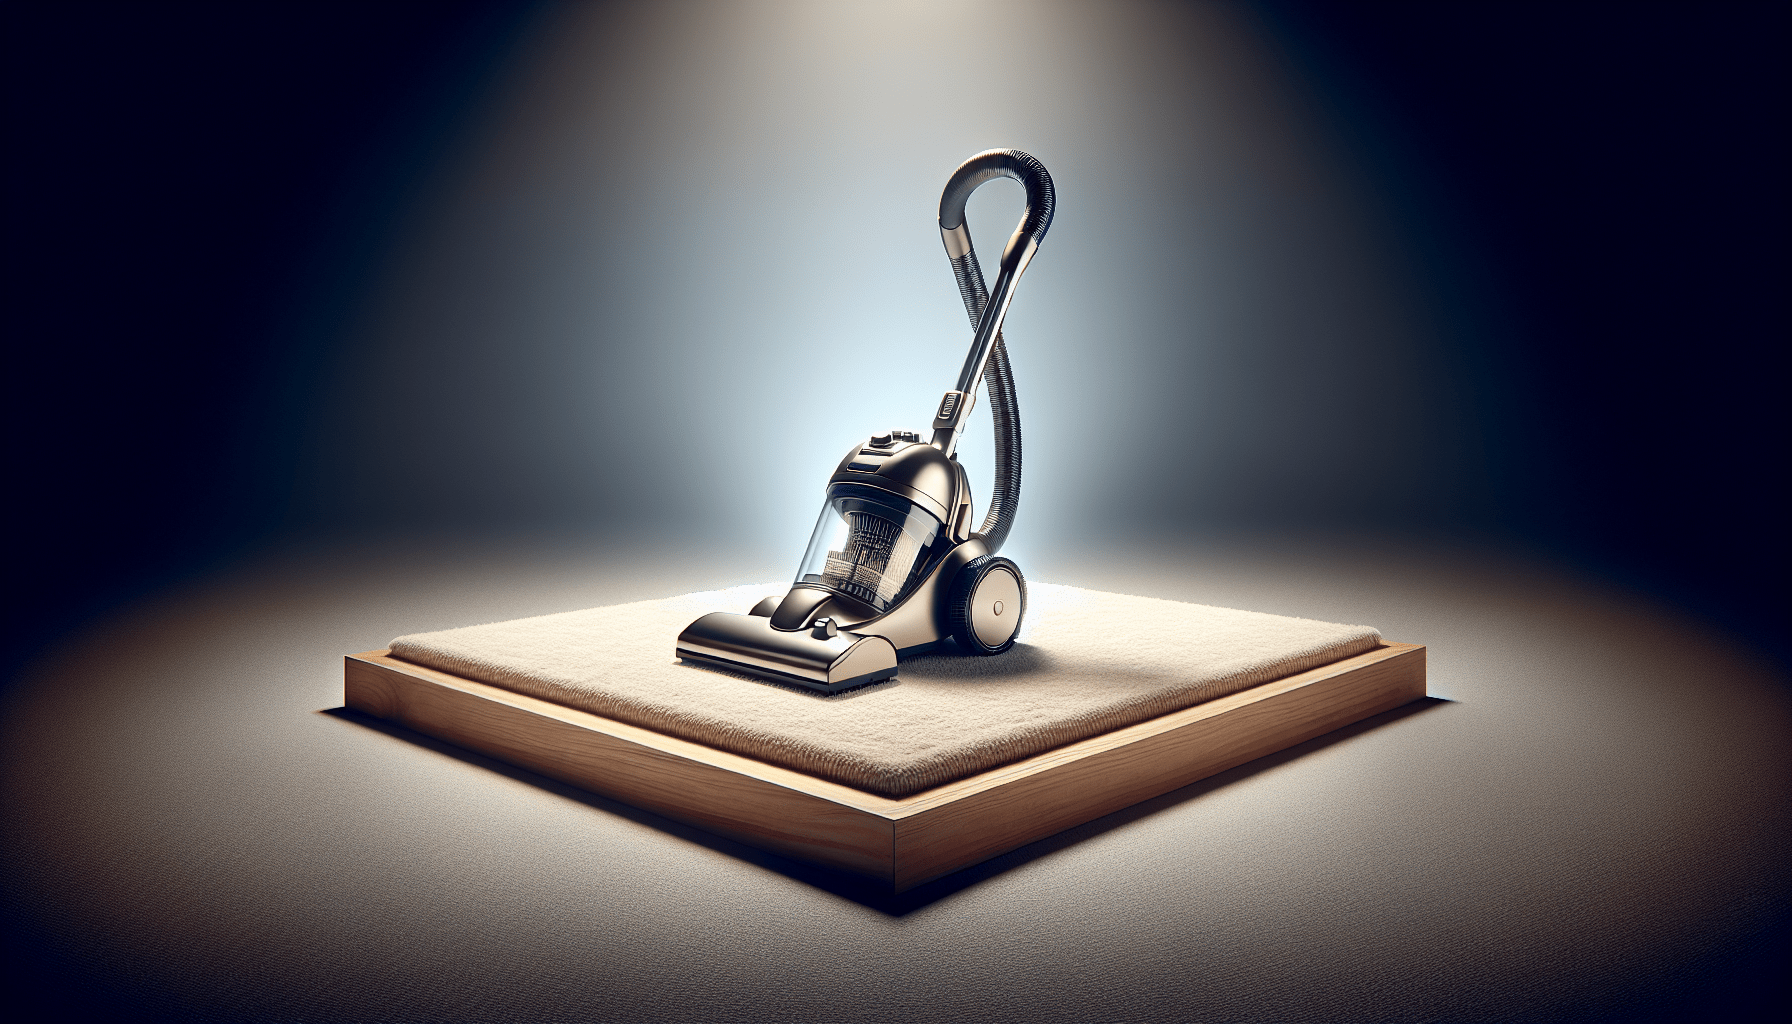 How Often Should You Replace Your Vacuum Cleaner?